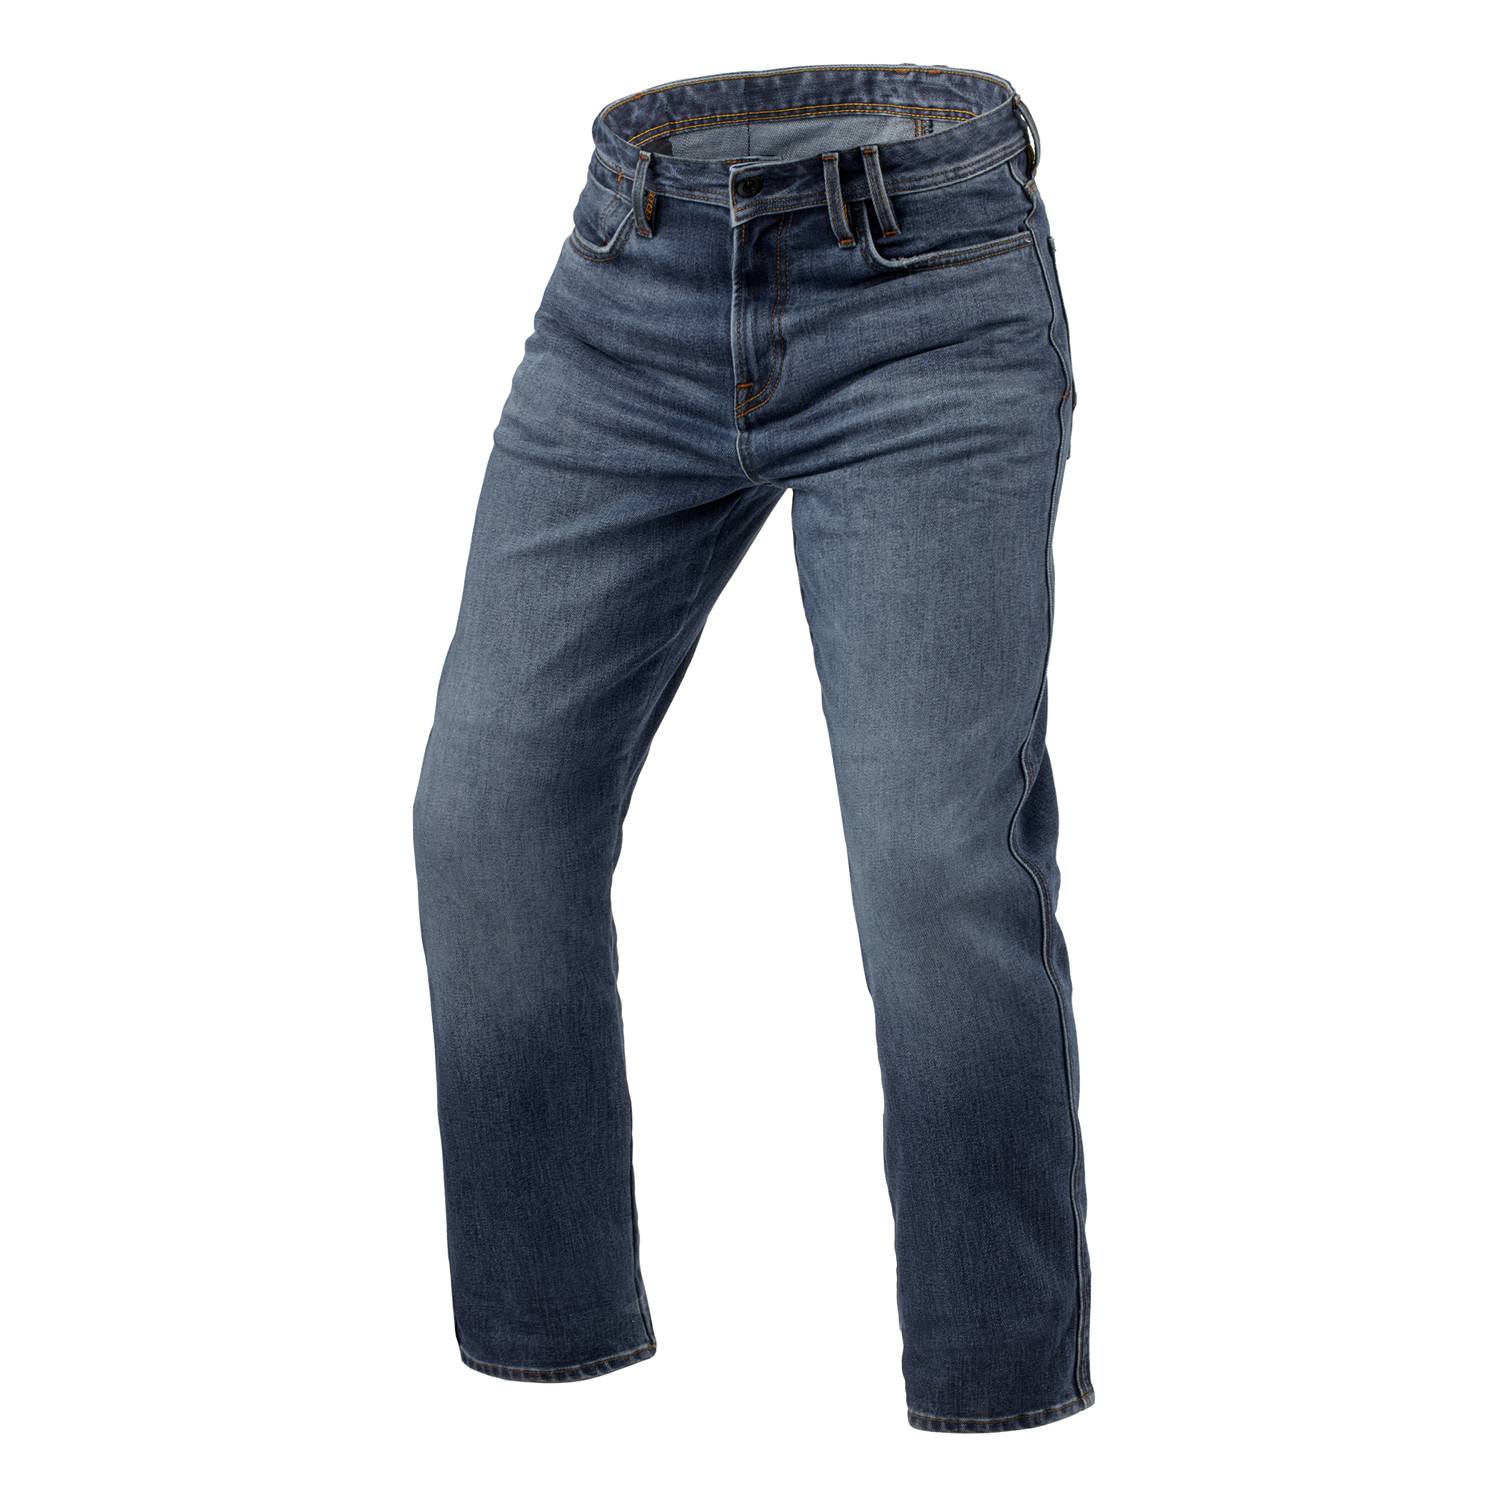 Image of EU REV'IT! Jeans Lombard 3 RF Medium Blue Stone L34 Motorcycle Jeans Taille L34/W30